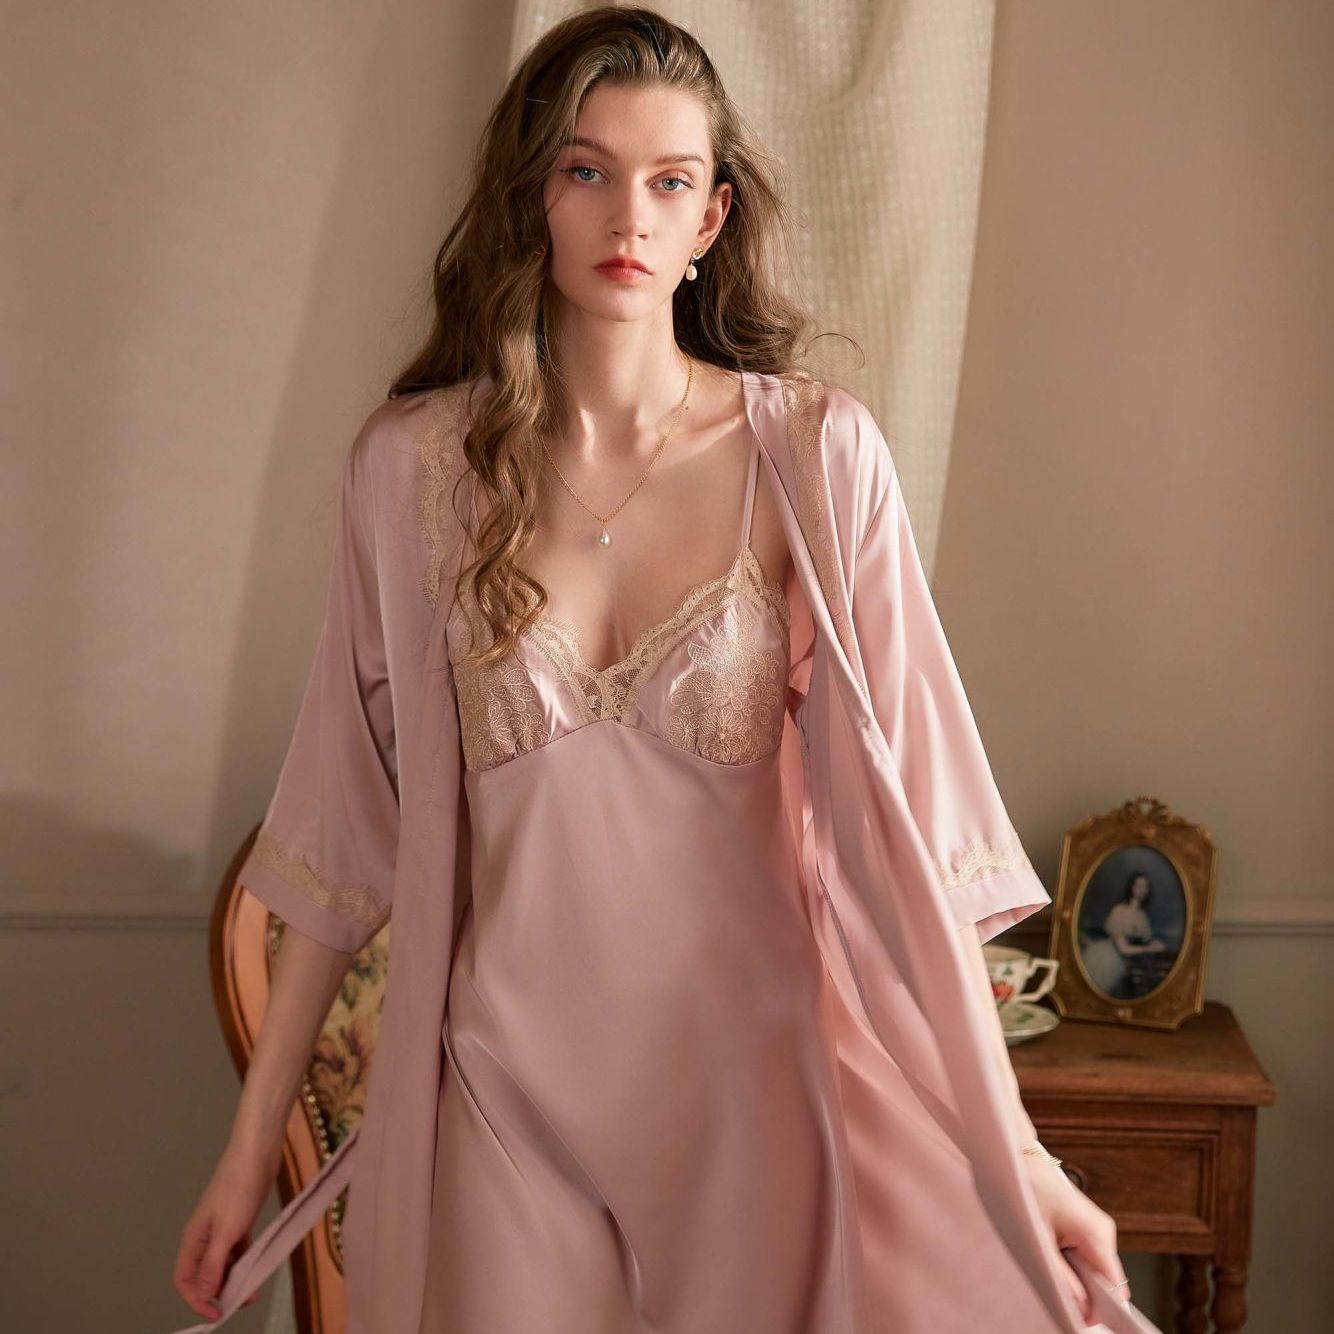 Sexy pajamas women's 2022 new autumn and winter pure desire Style Lace advanced sense suspender nightdress Nightgown suit